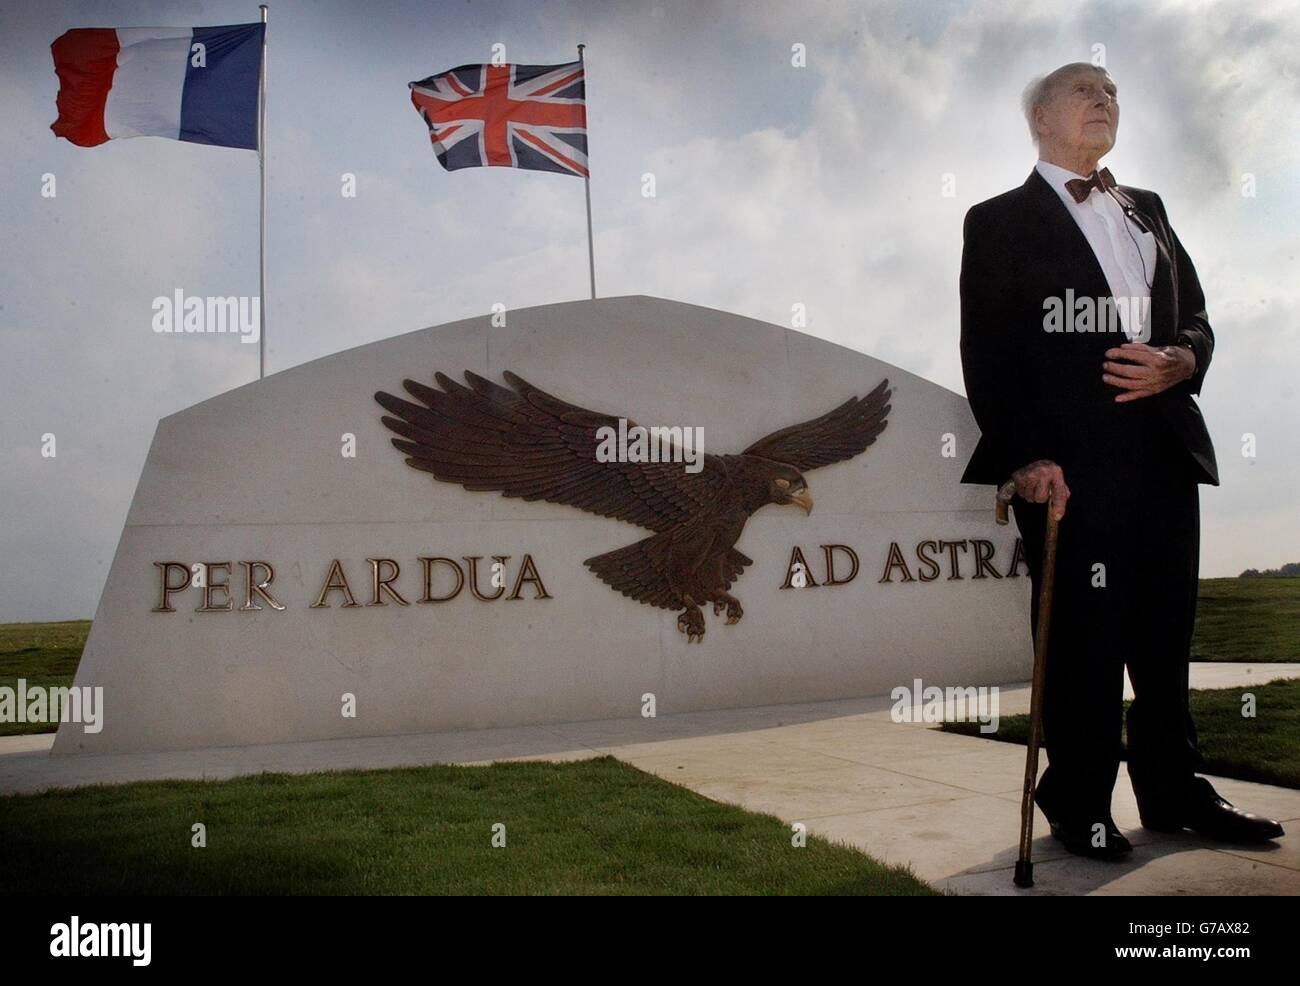 First World War veteran, Henry Allingham, 108, stands by the British Air Services Memorial which was unveiled at St Omer Airfield in France, and will be the first permanent memorial to the men and women who served on the Western Front. Stock Photo